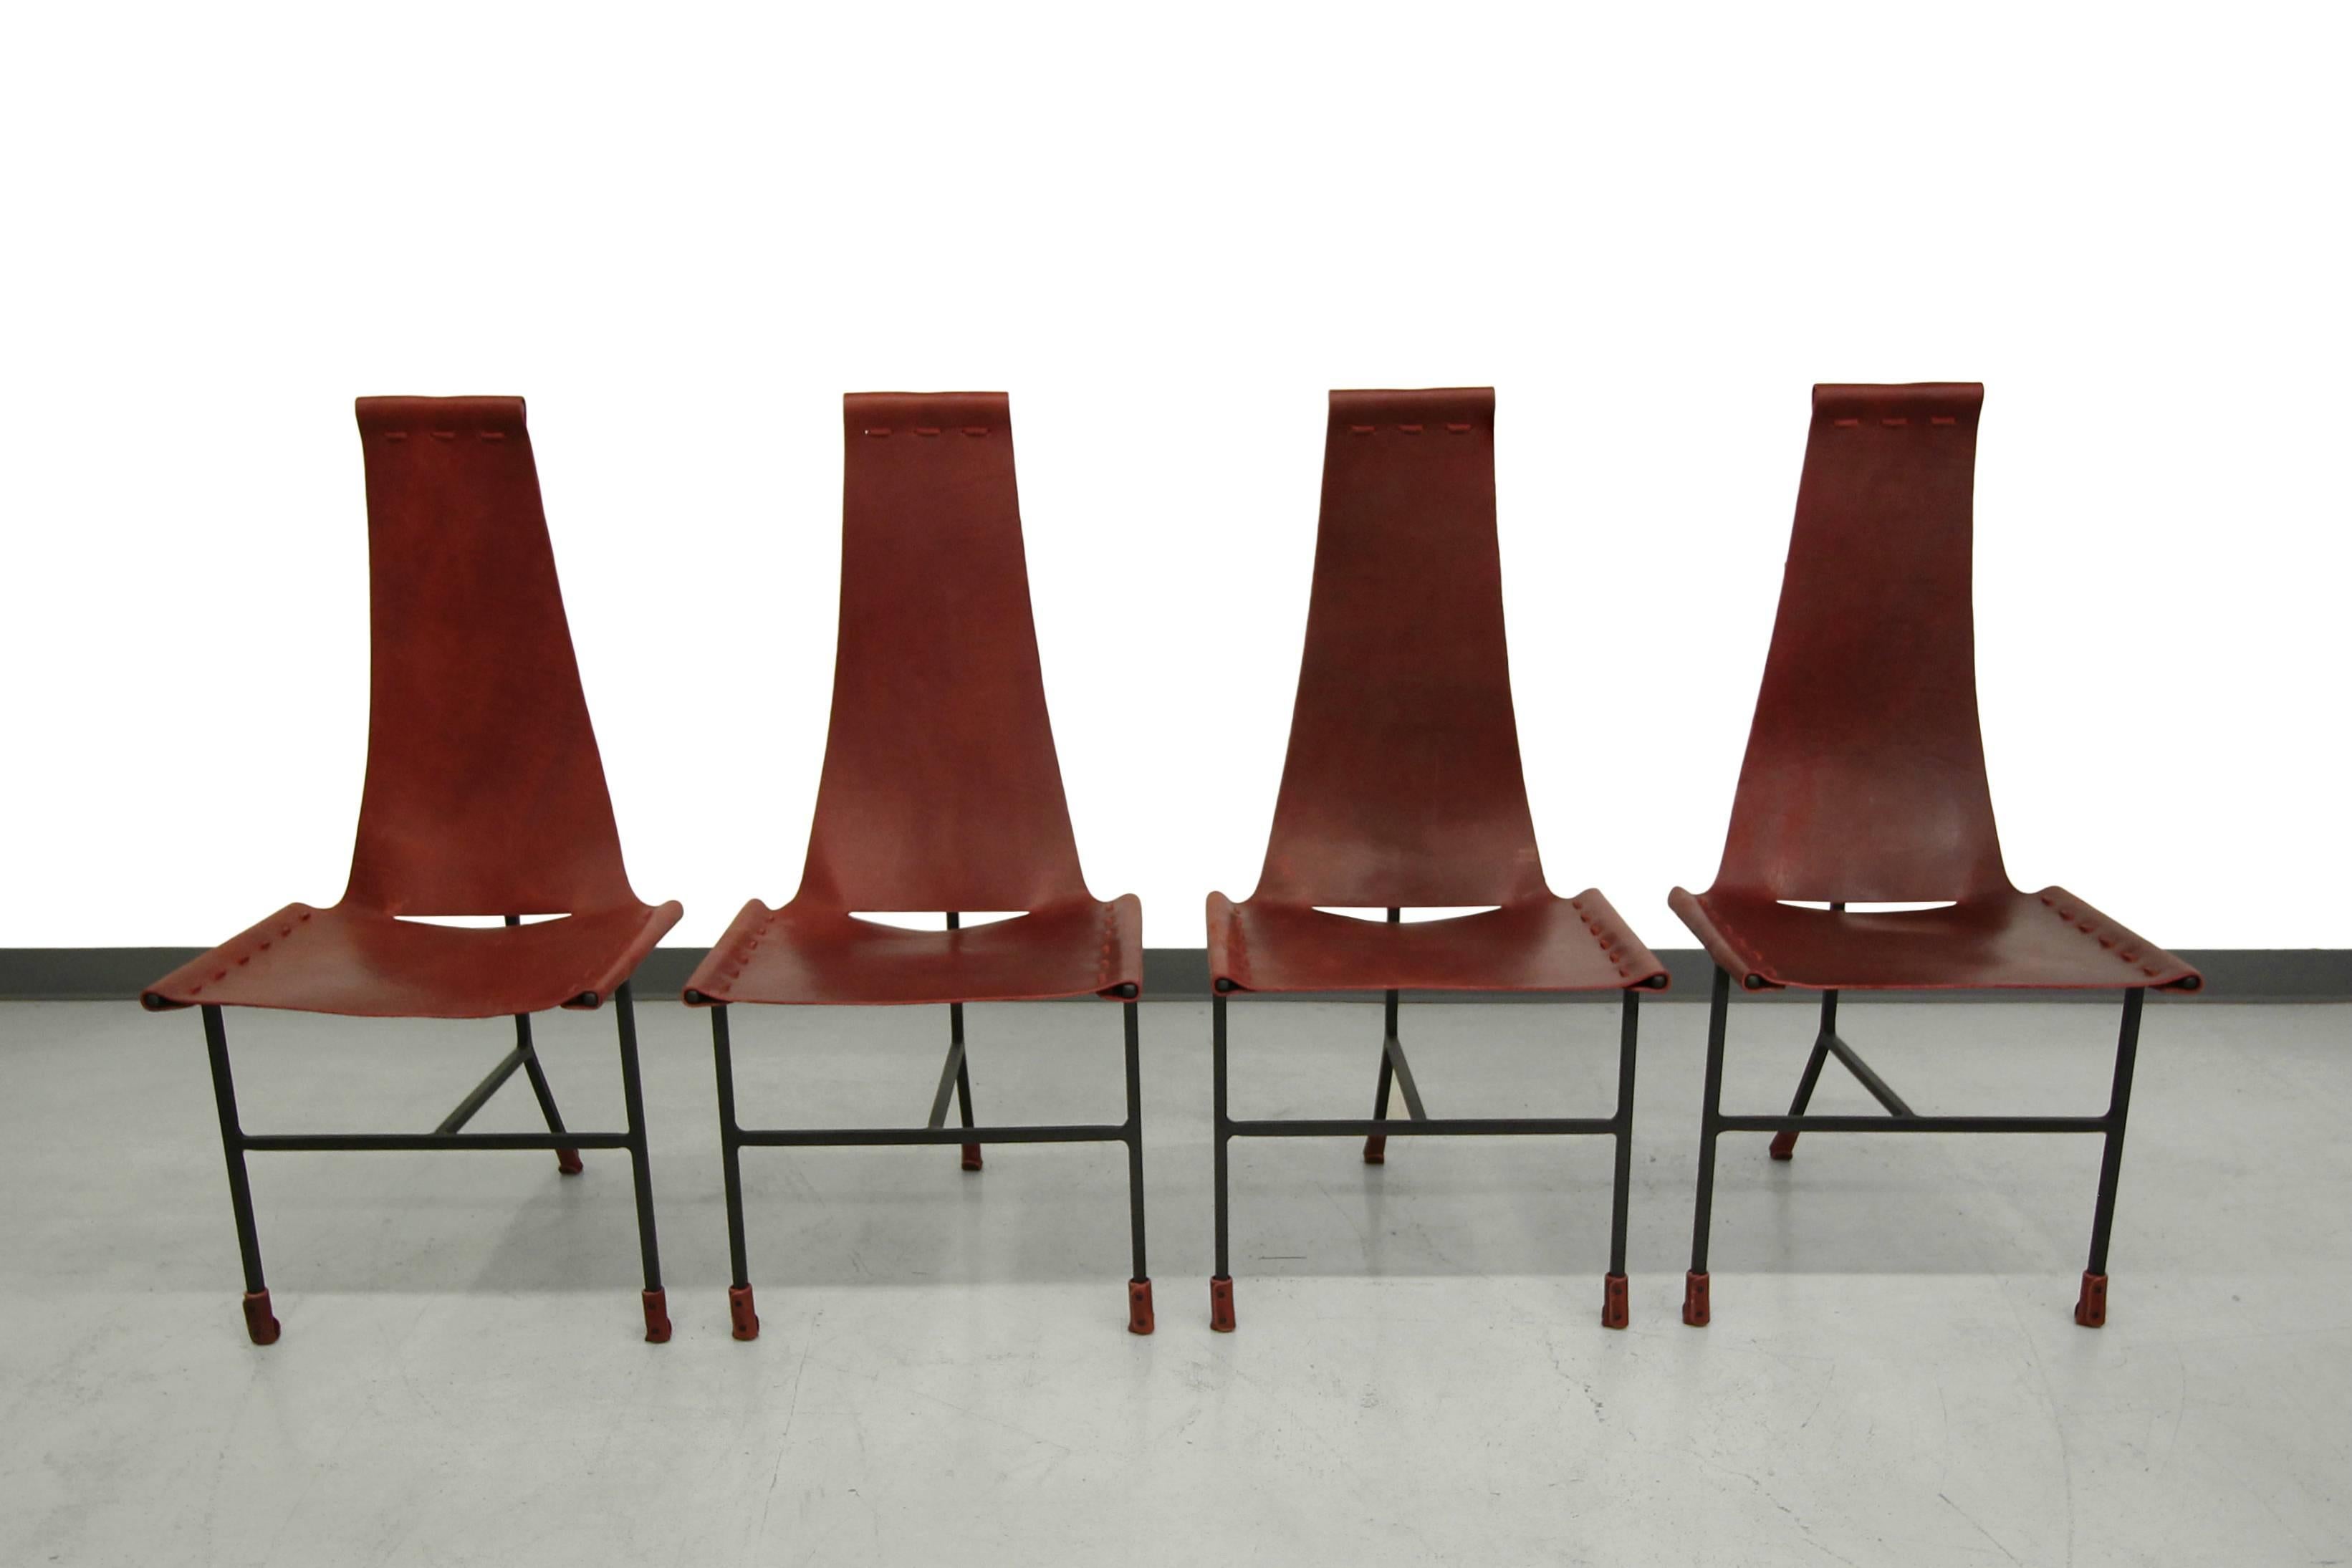 Beautiful set of Set of four Latigo leather dining chairs by Daniel Wegner. The leather slings are very nice, dark brick red. Chairs feature classic flat black, originally manufactured in the 1960s, these chair were brought back in to production in